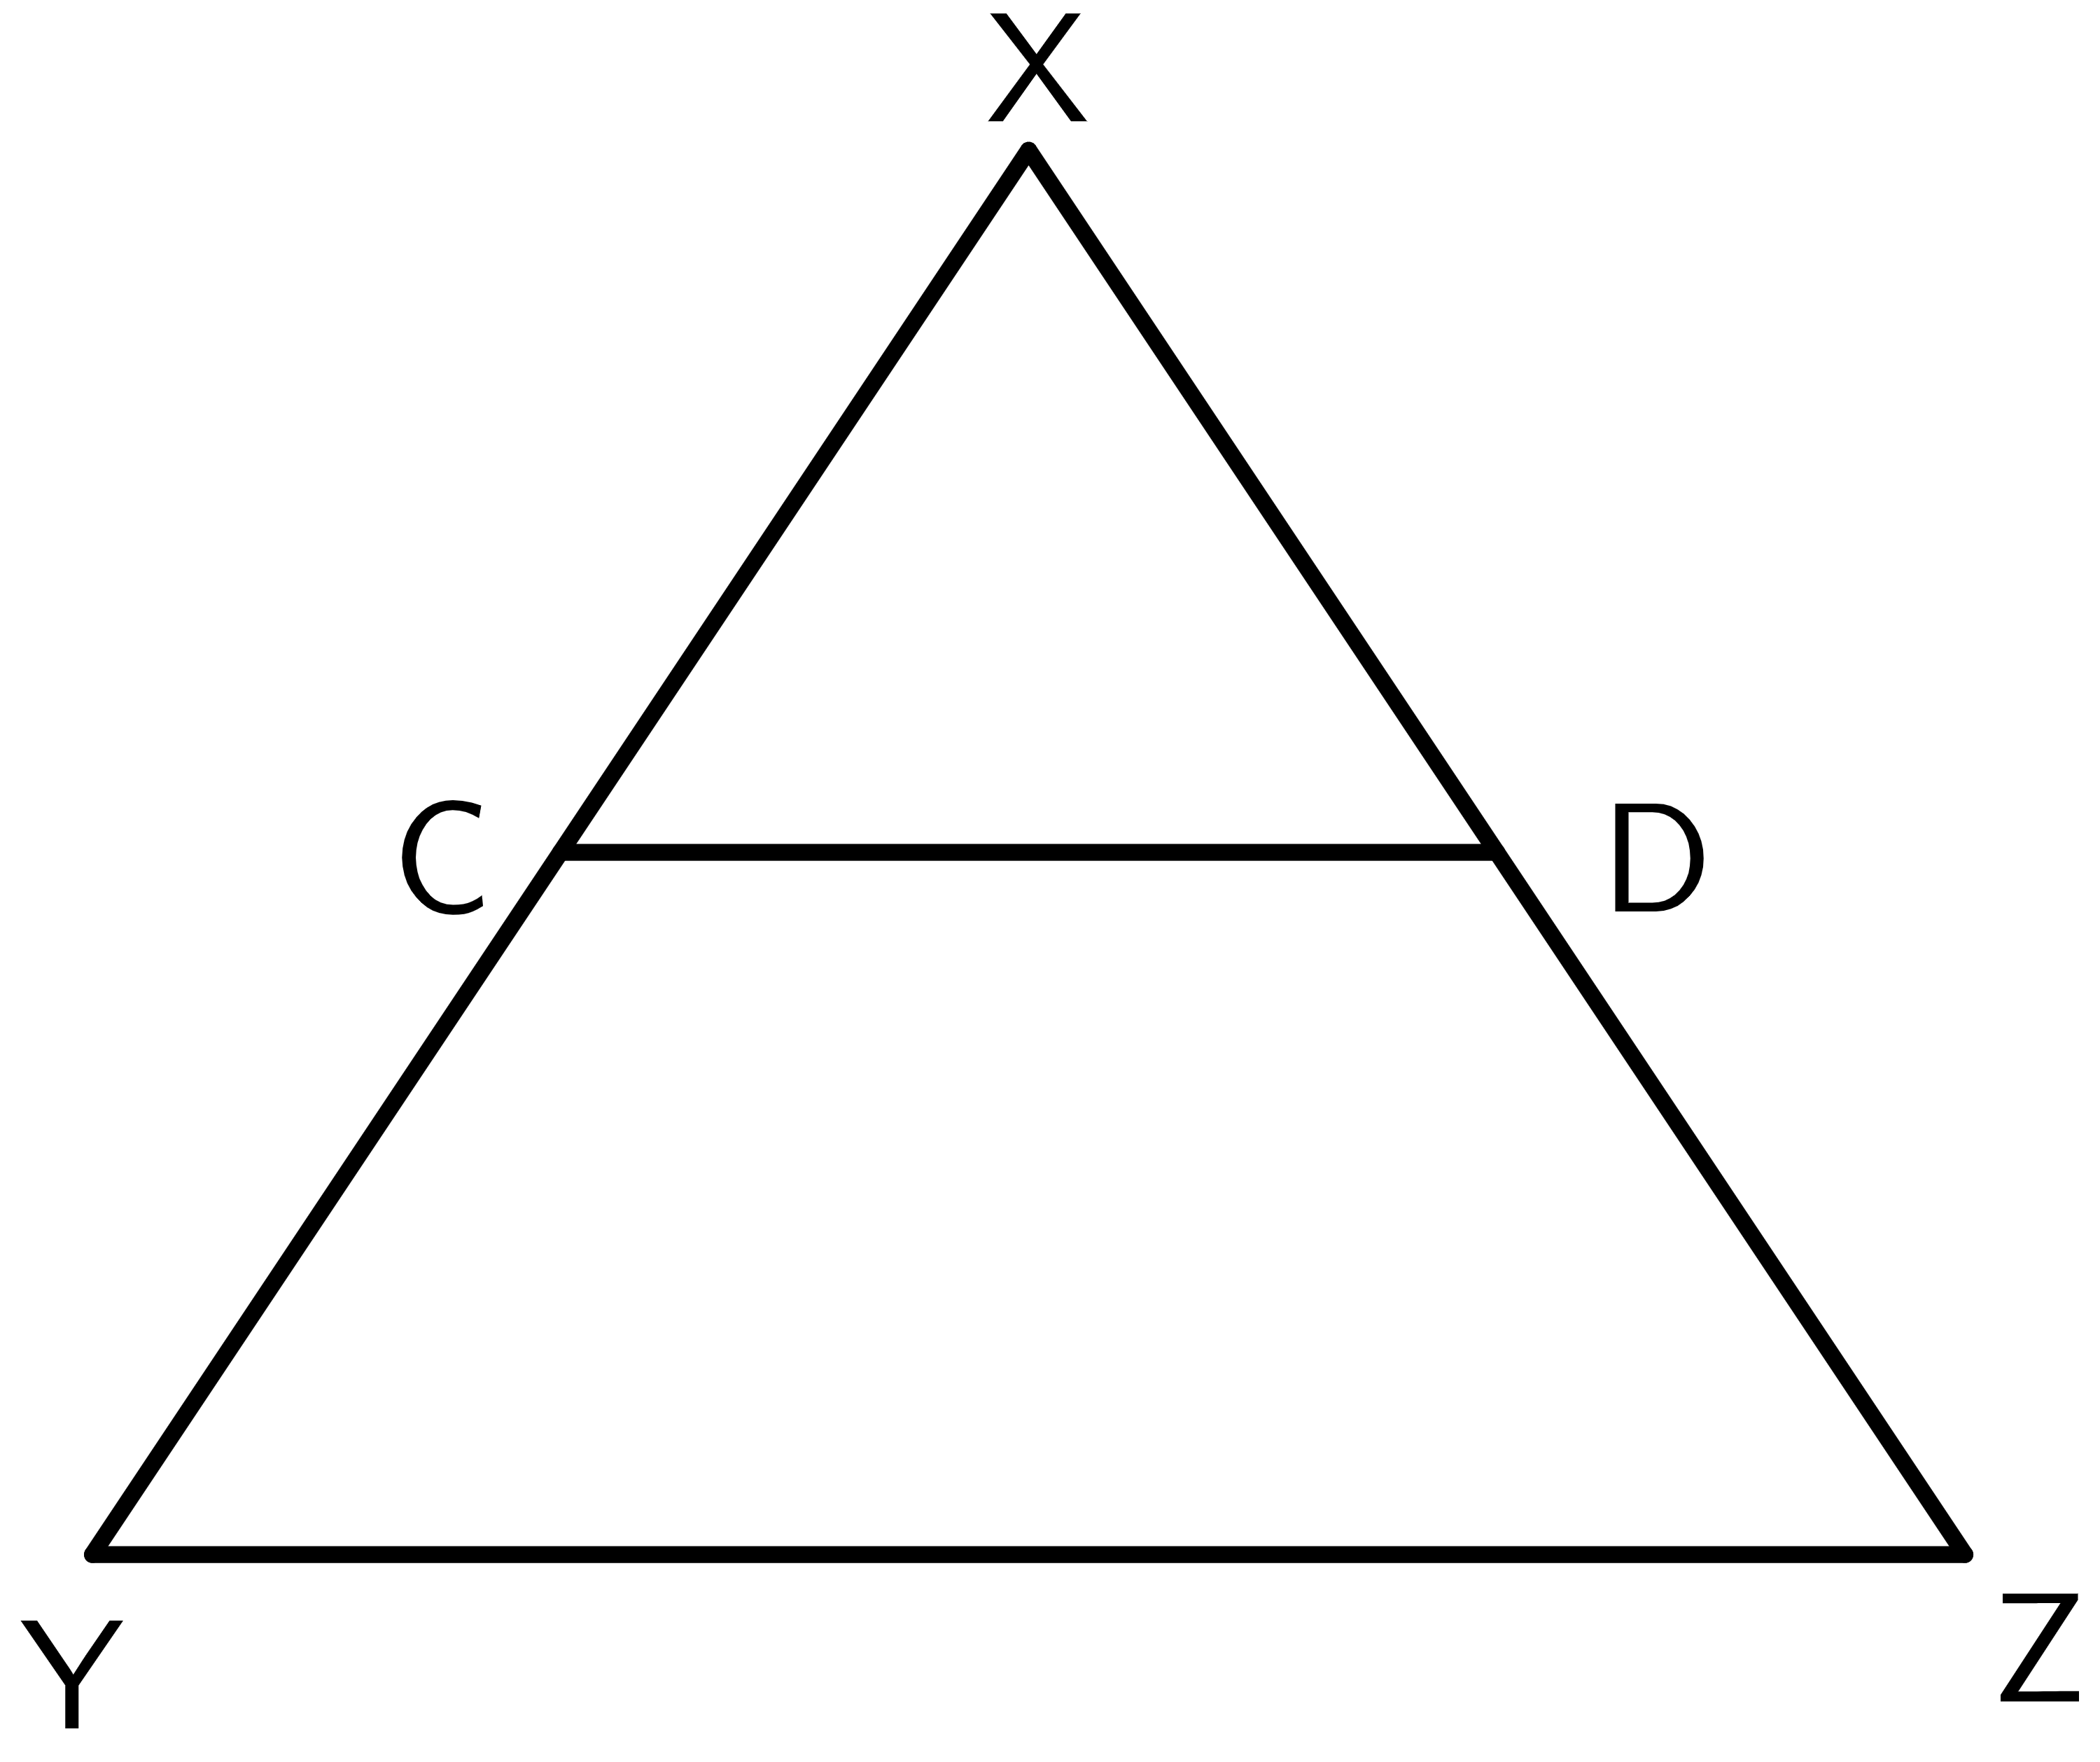 Triangle proportionality theorem fig